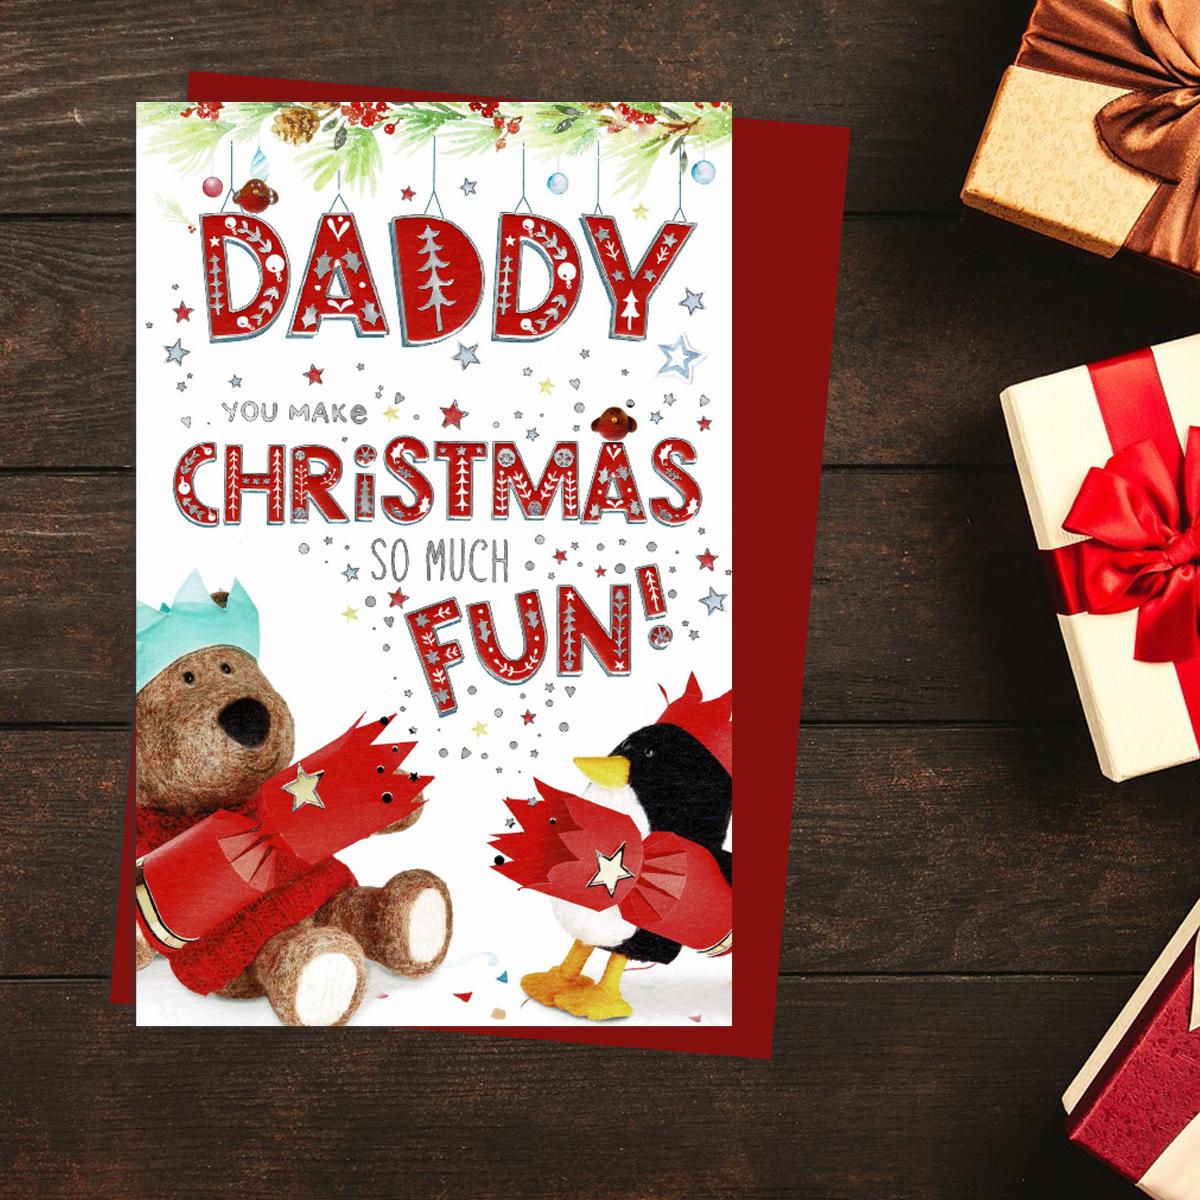 Daddy Christmas Card Alongside Its Red Envelope